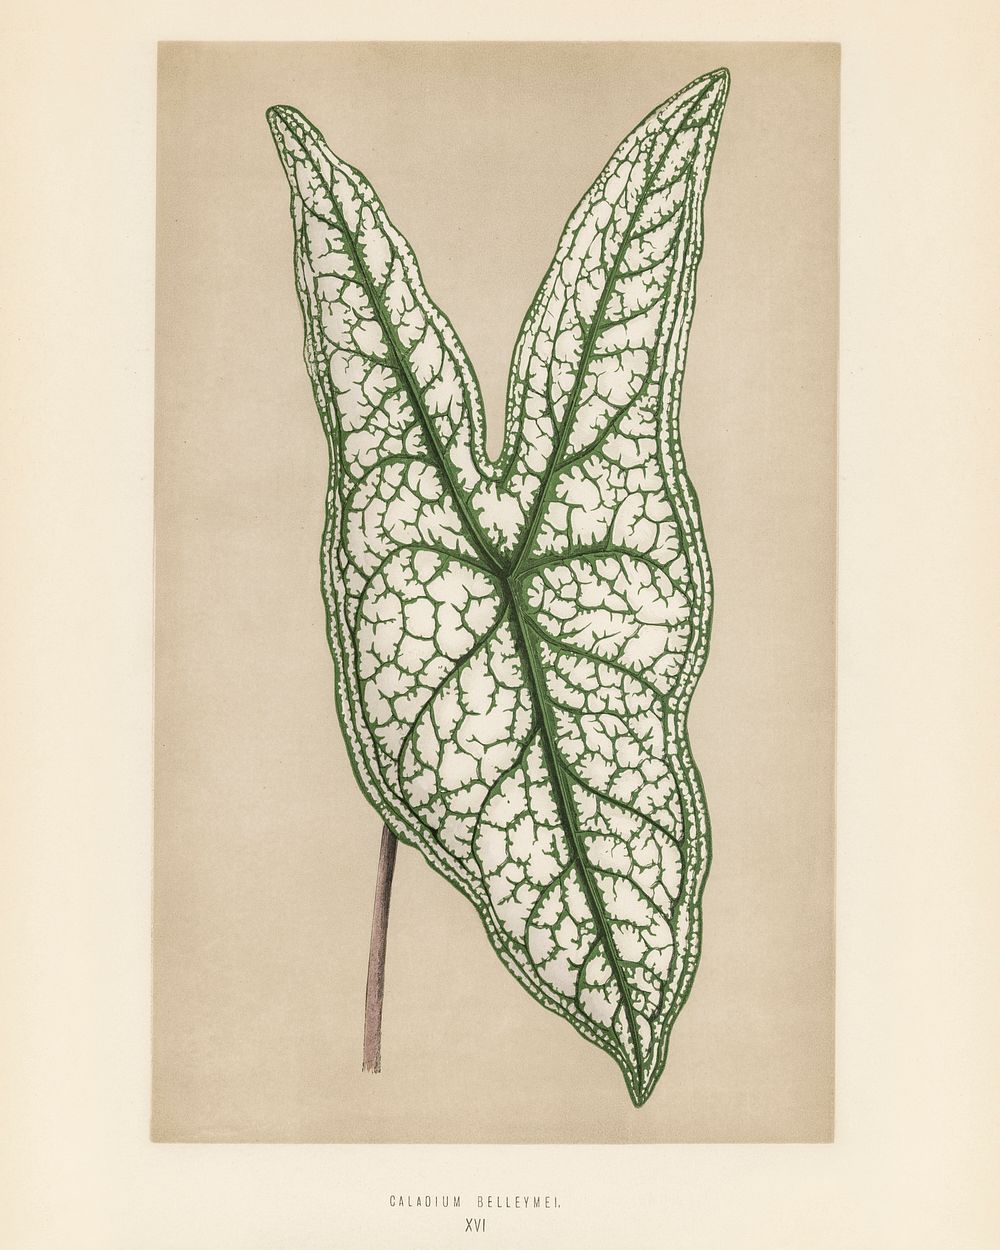 Heart of Jesus (Caladium Belleymel). Digitally enhanced from our own 1929 edition of New and Rare Beautiful-Leaved Plants by…